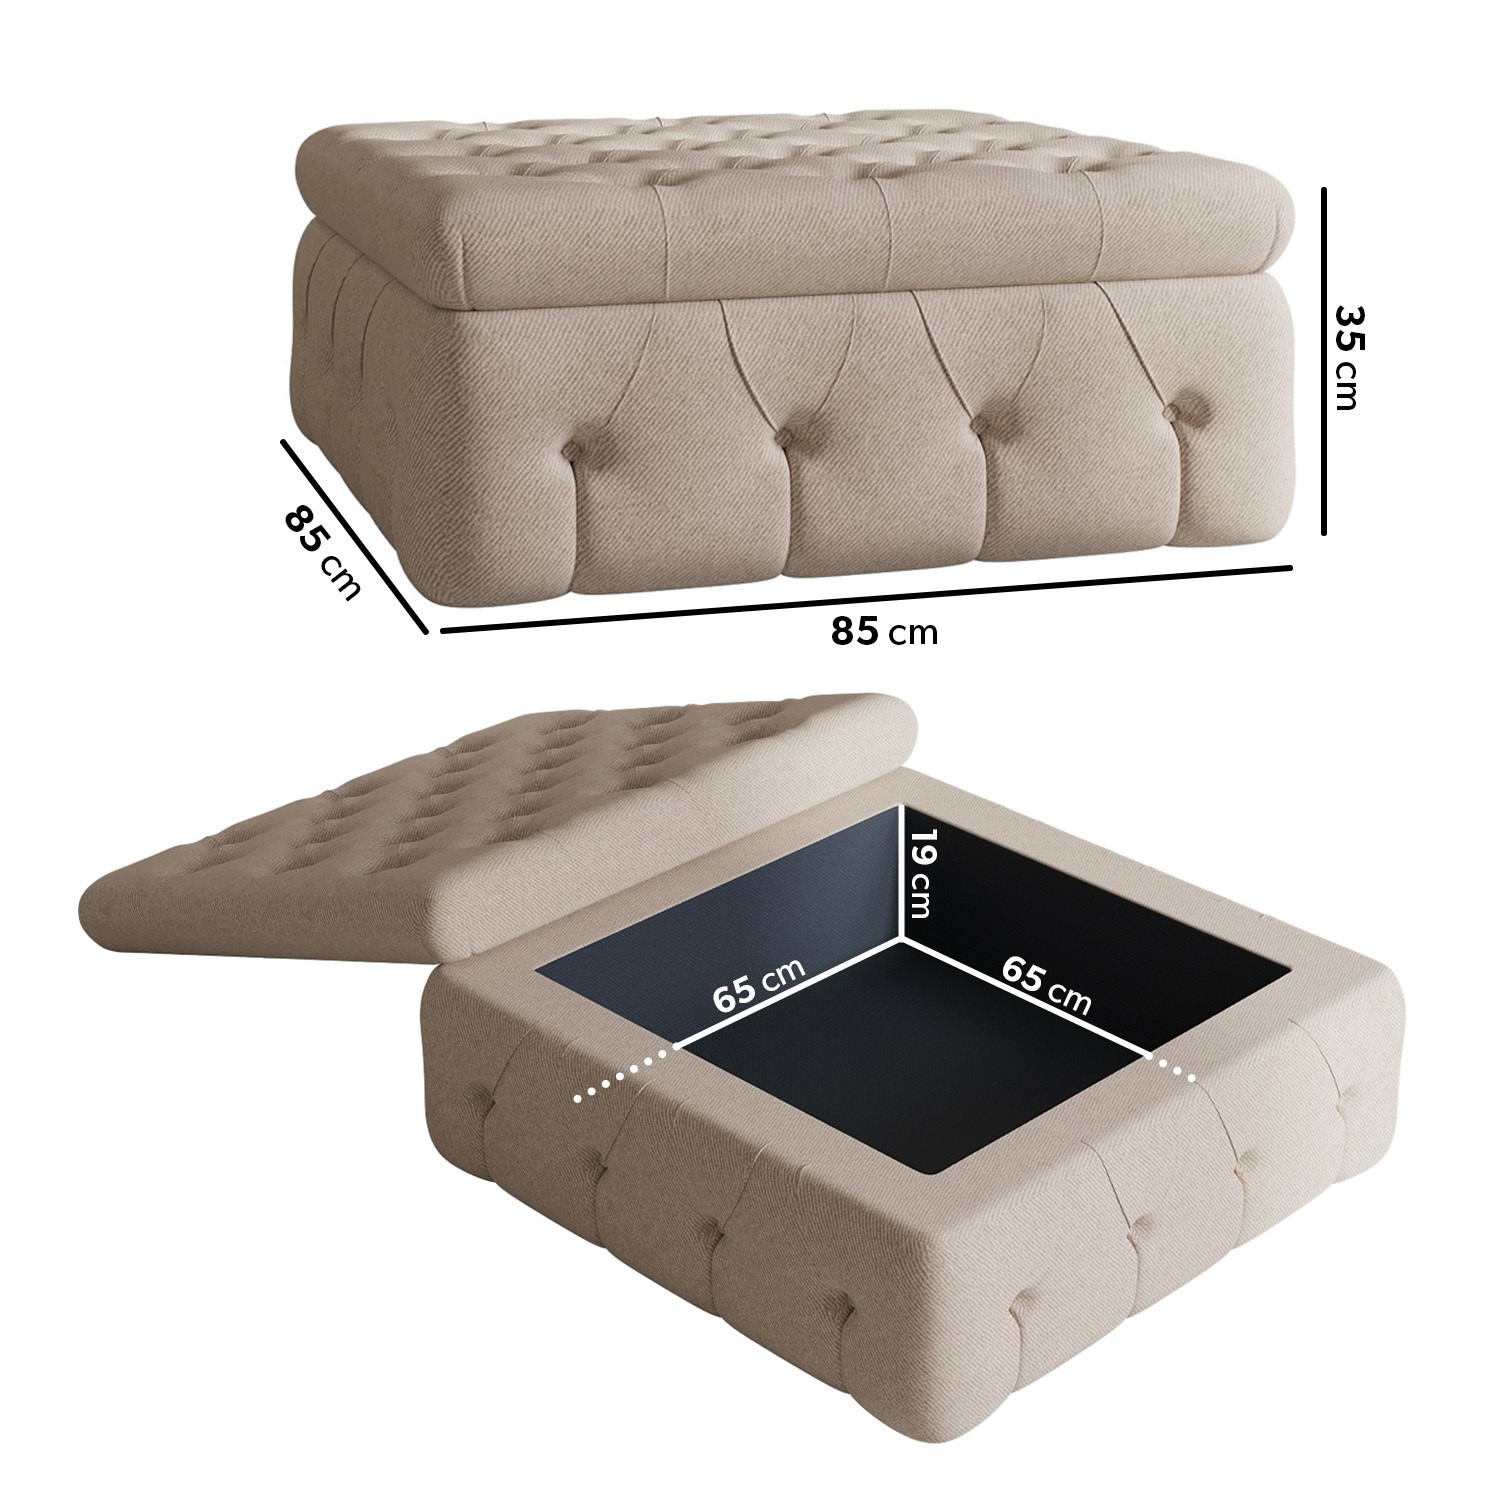 Read more about Large beige fabric storage footstool payton